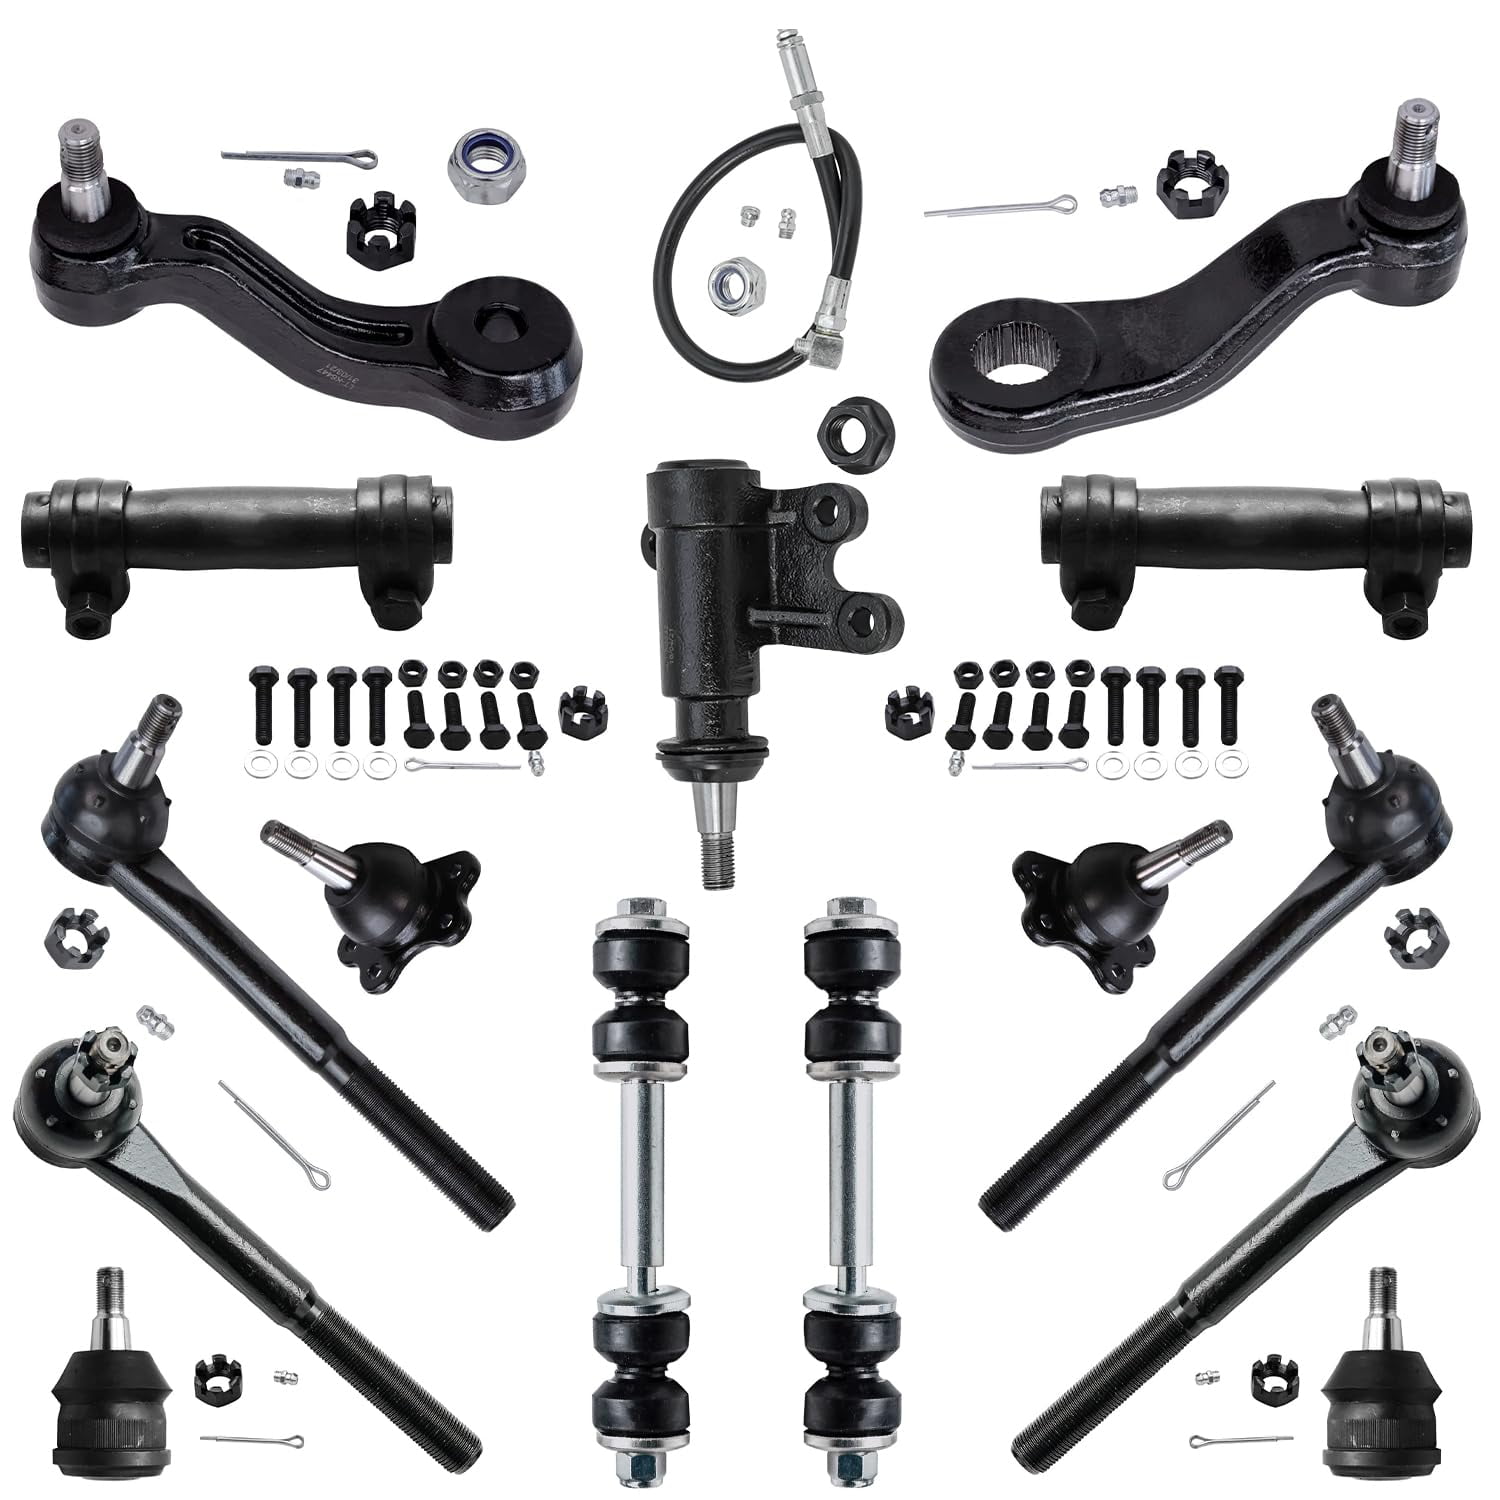 Detroit Axle Front Ball Joints Tie Rods Sway Bar Links Suspension Kit  Replacement for Chevy GMC C1500 Suburban C2500 Tahoe Yukon 15pc Set 